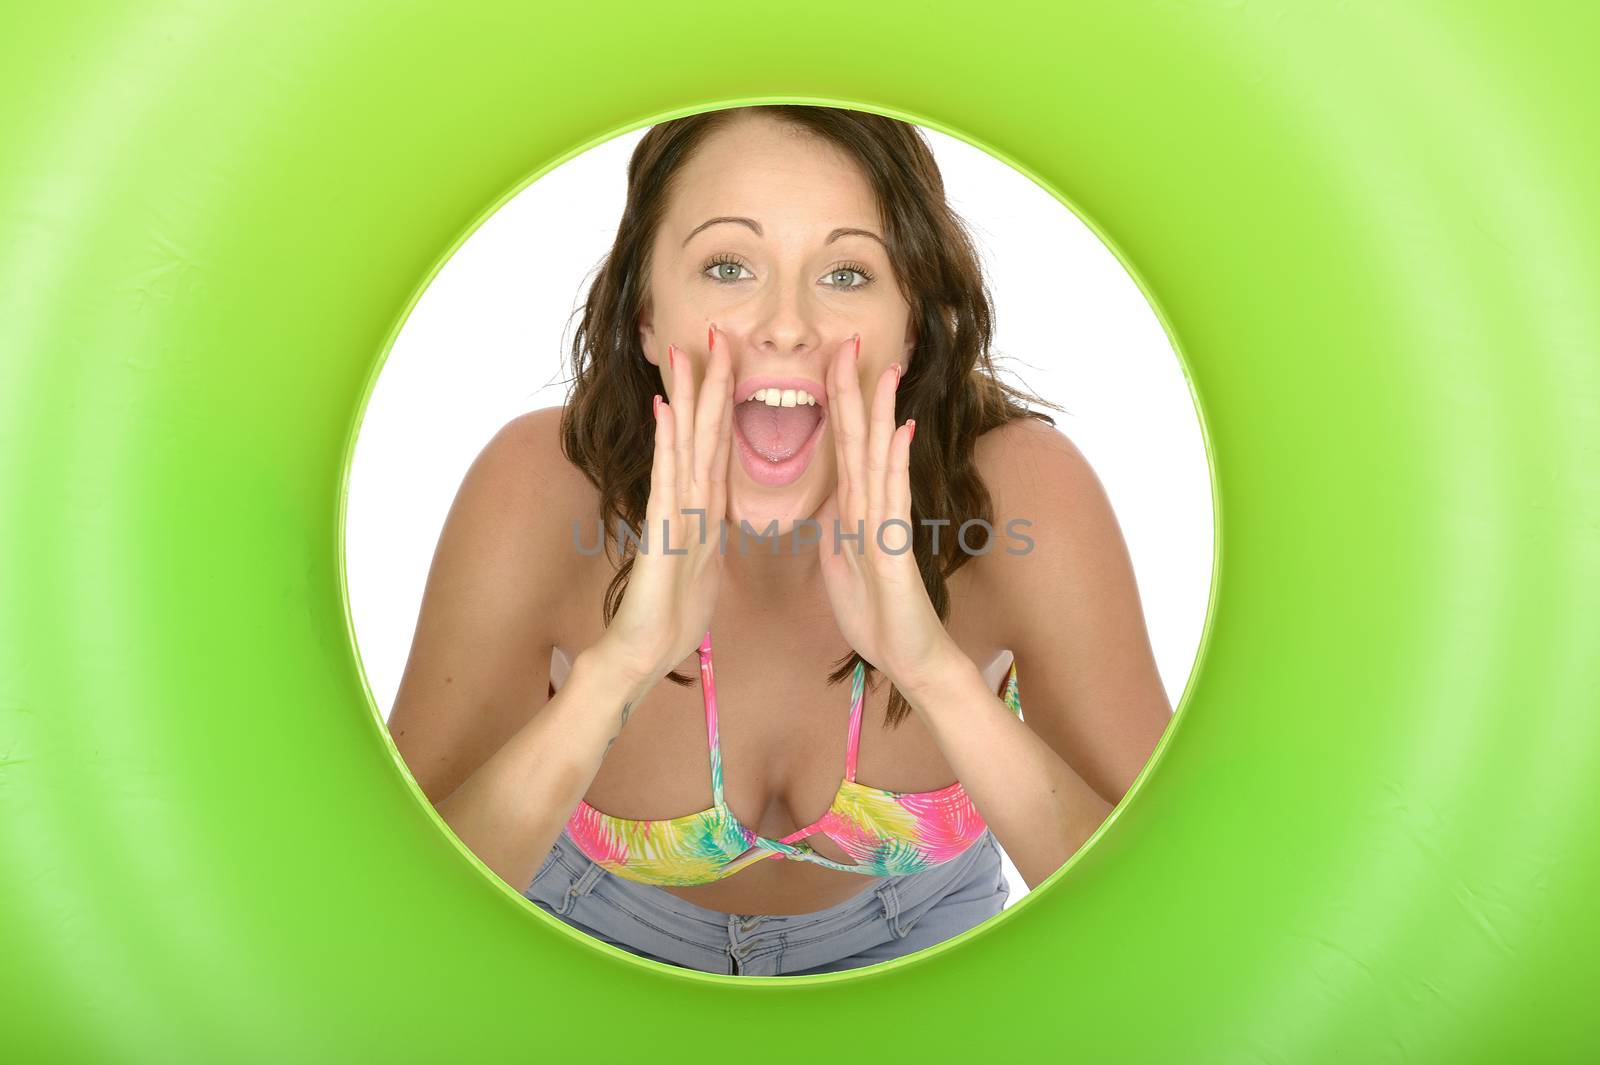 Attractive Young Woman Looking Through a Green Rubber Ring by Whiteboxmedia